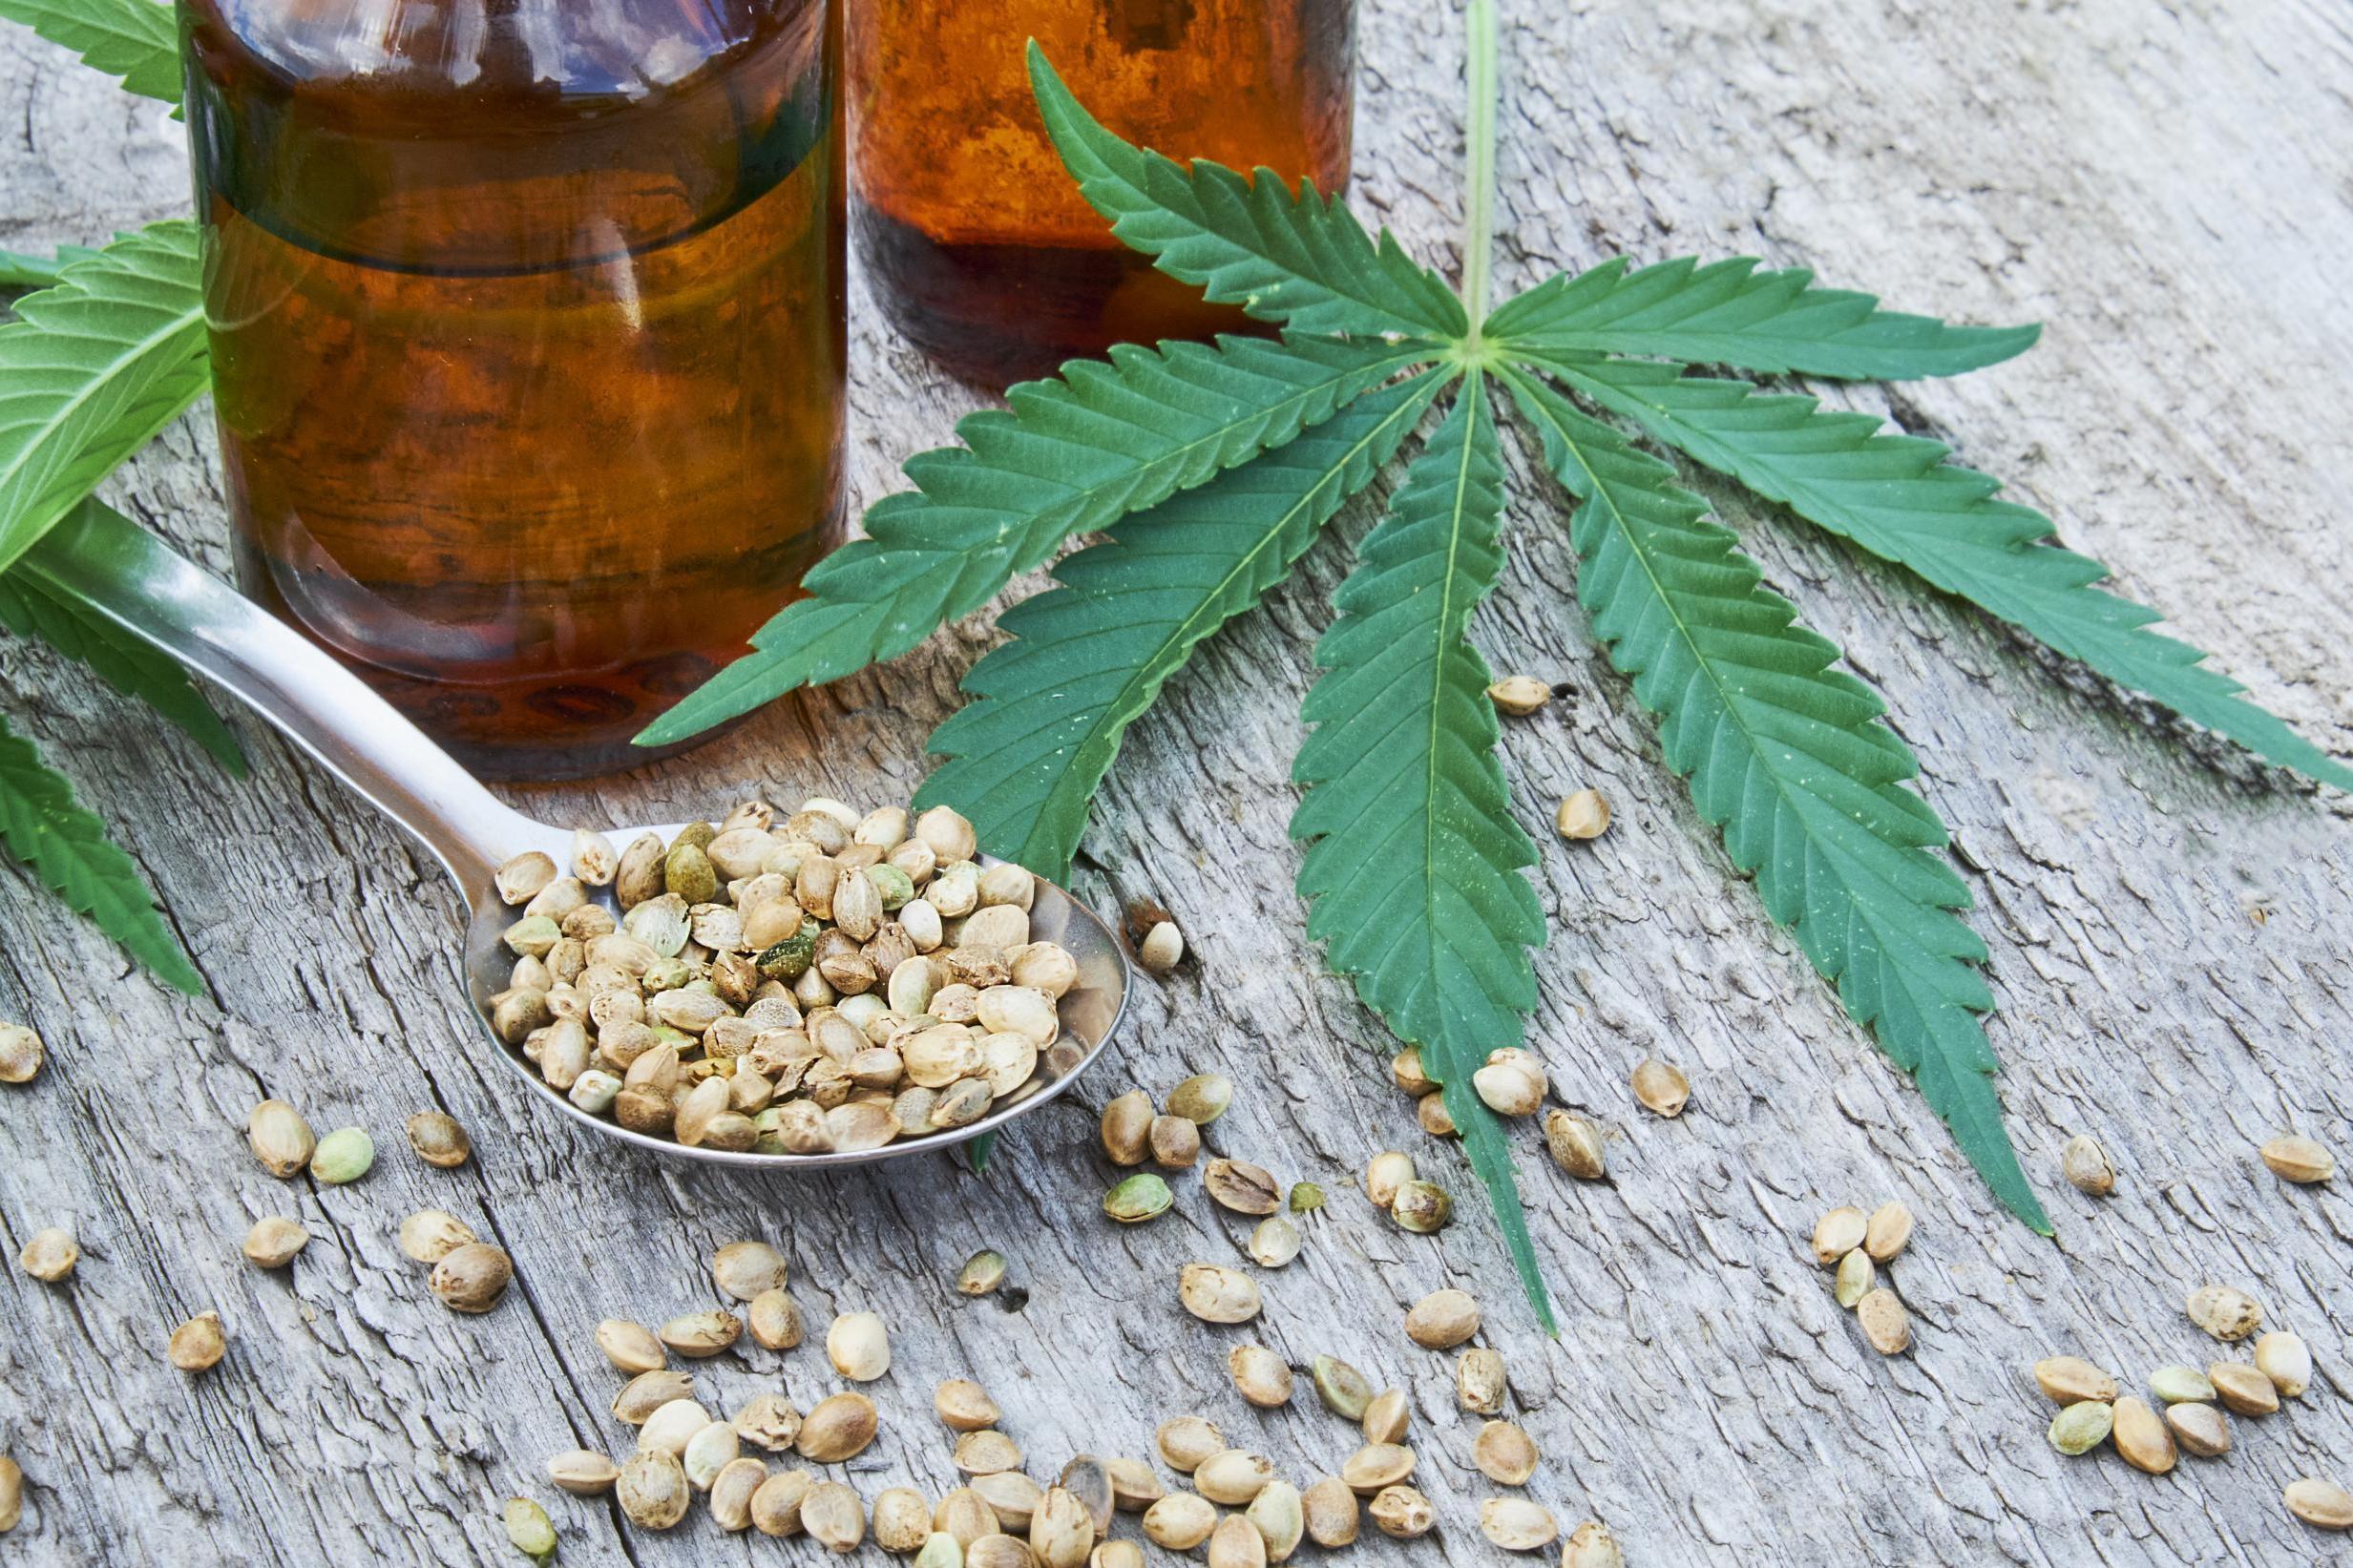 CBD products launched in 2019